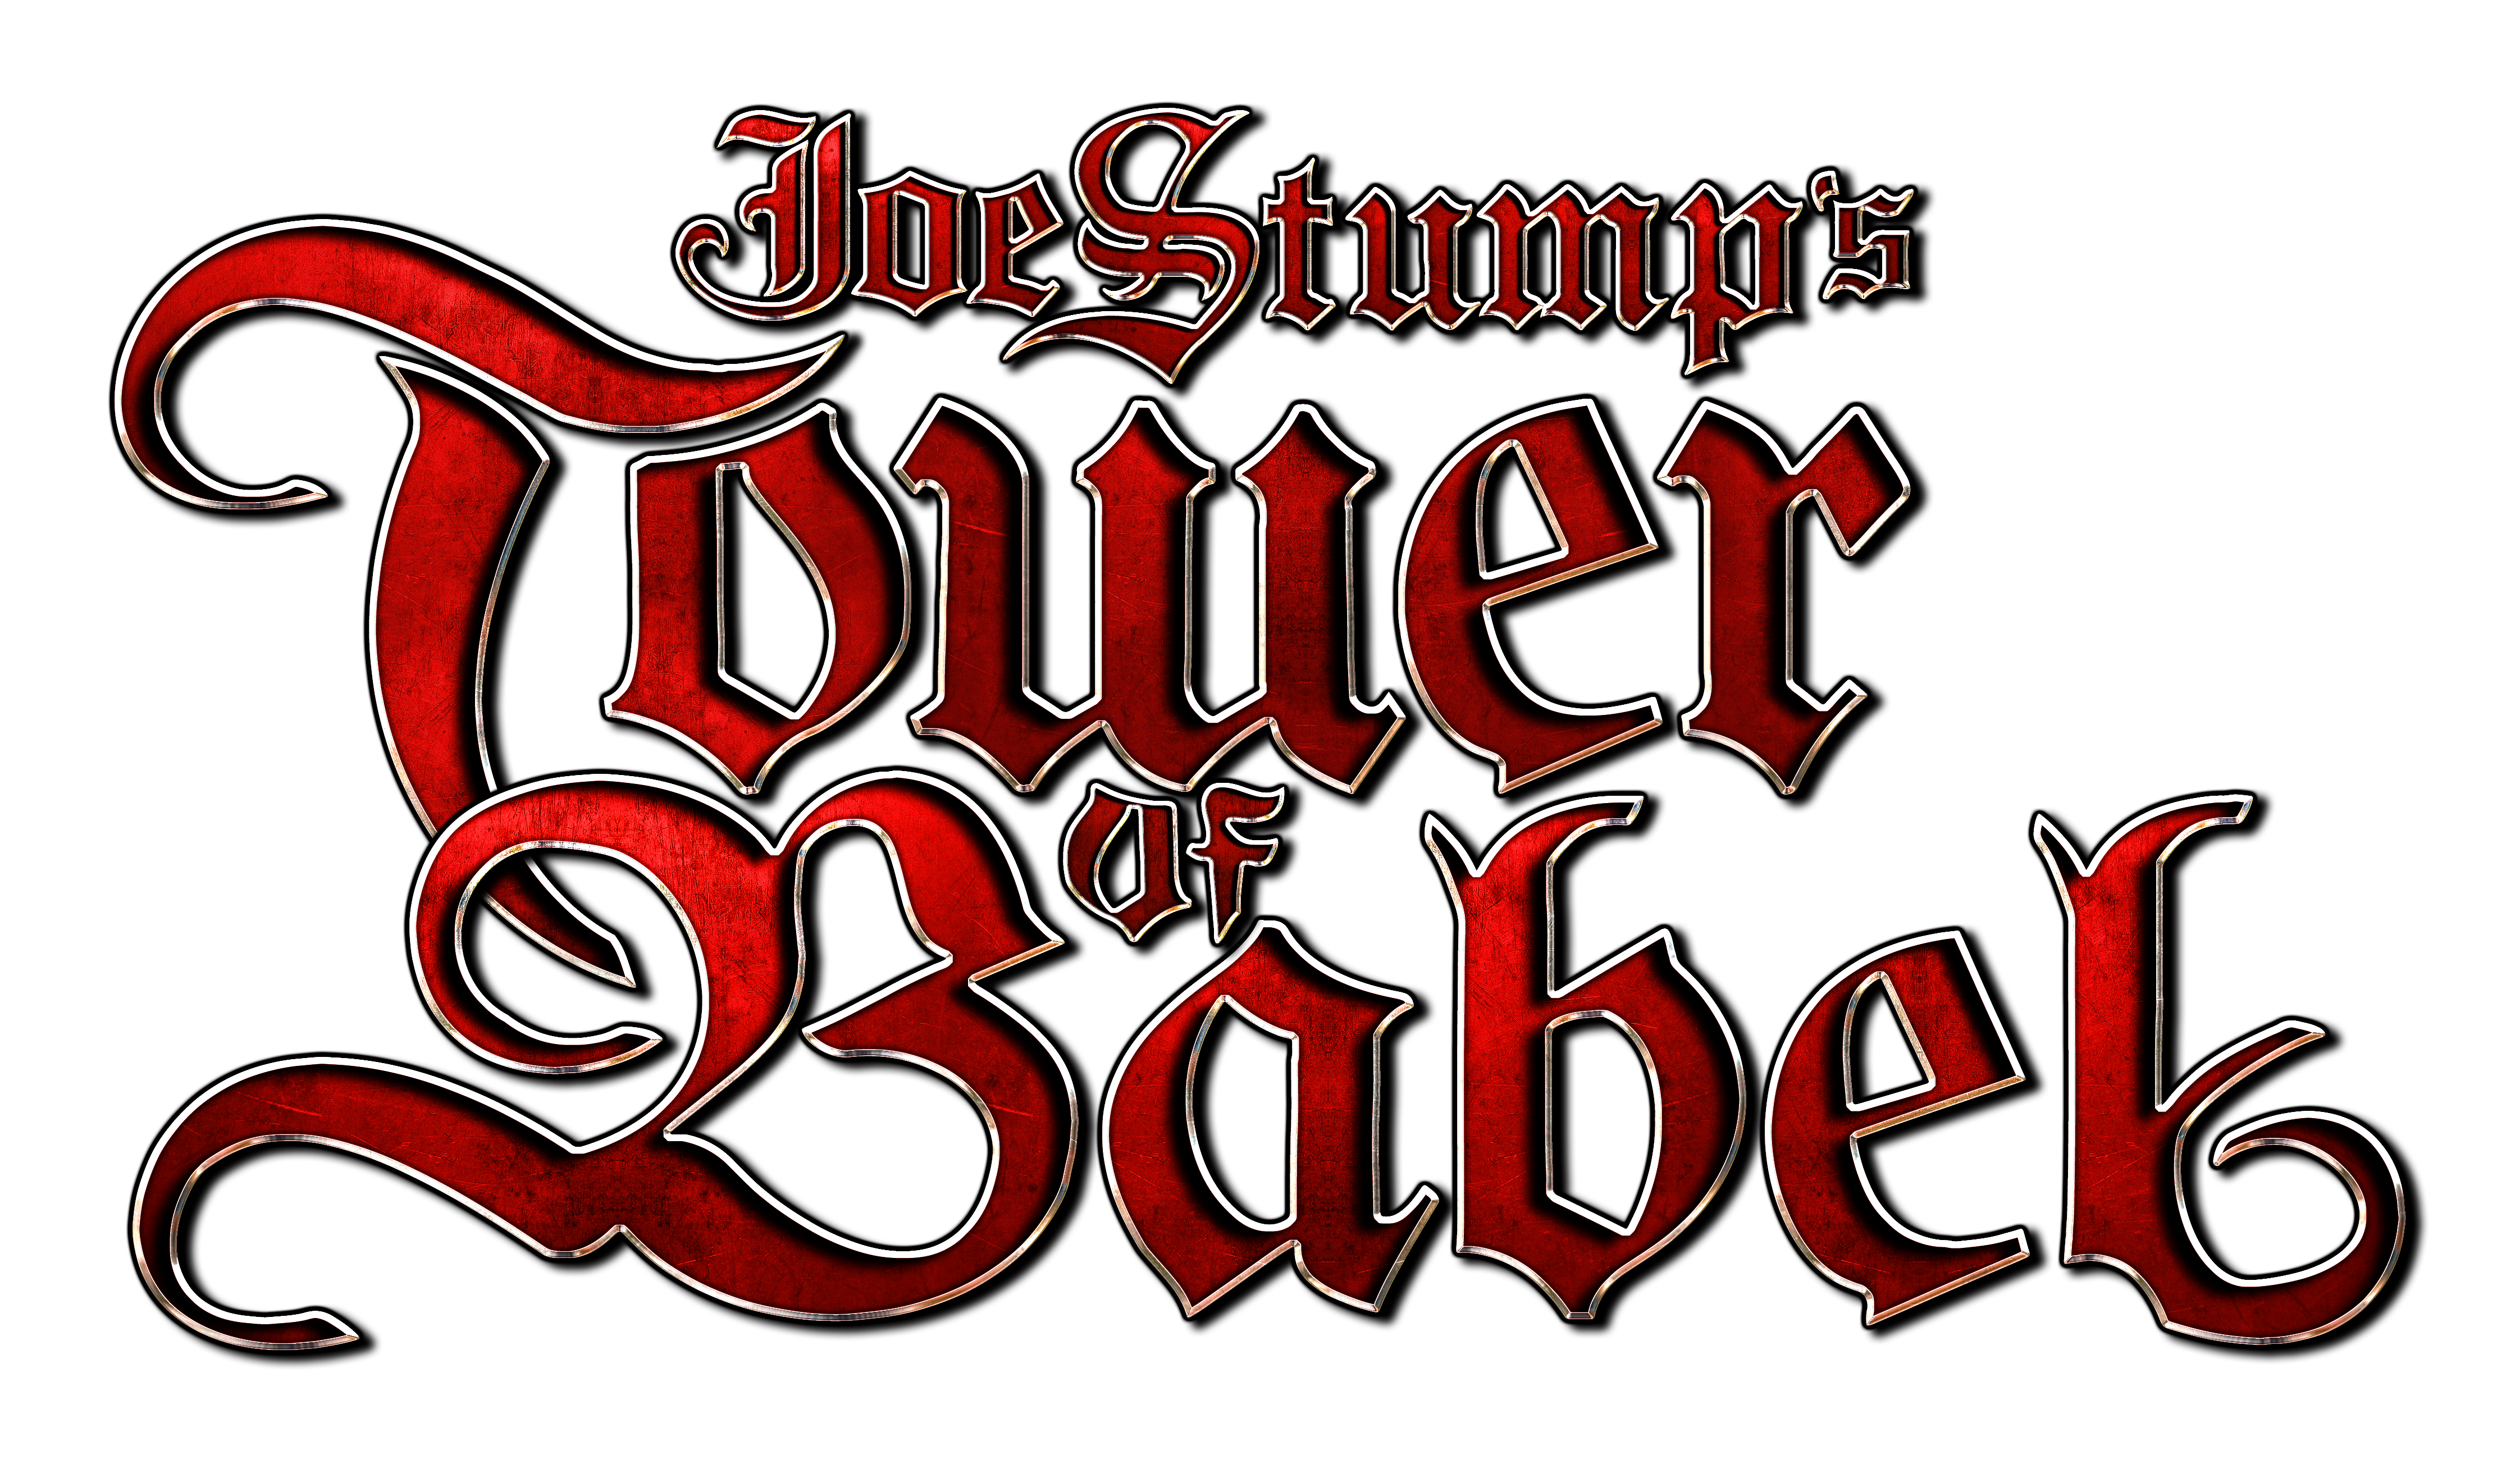 Welcome to the official Website of Joe Stump´s Tower of Babel